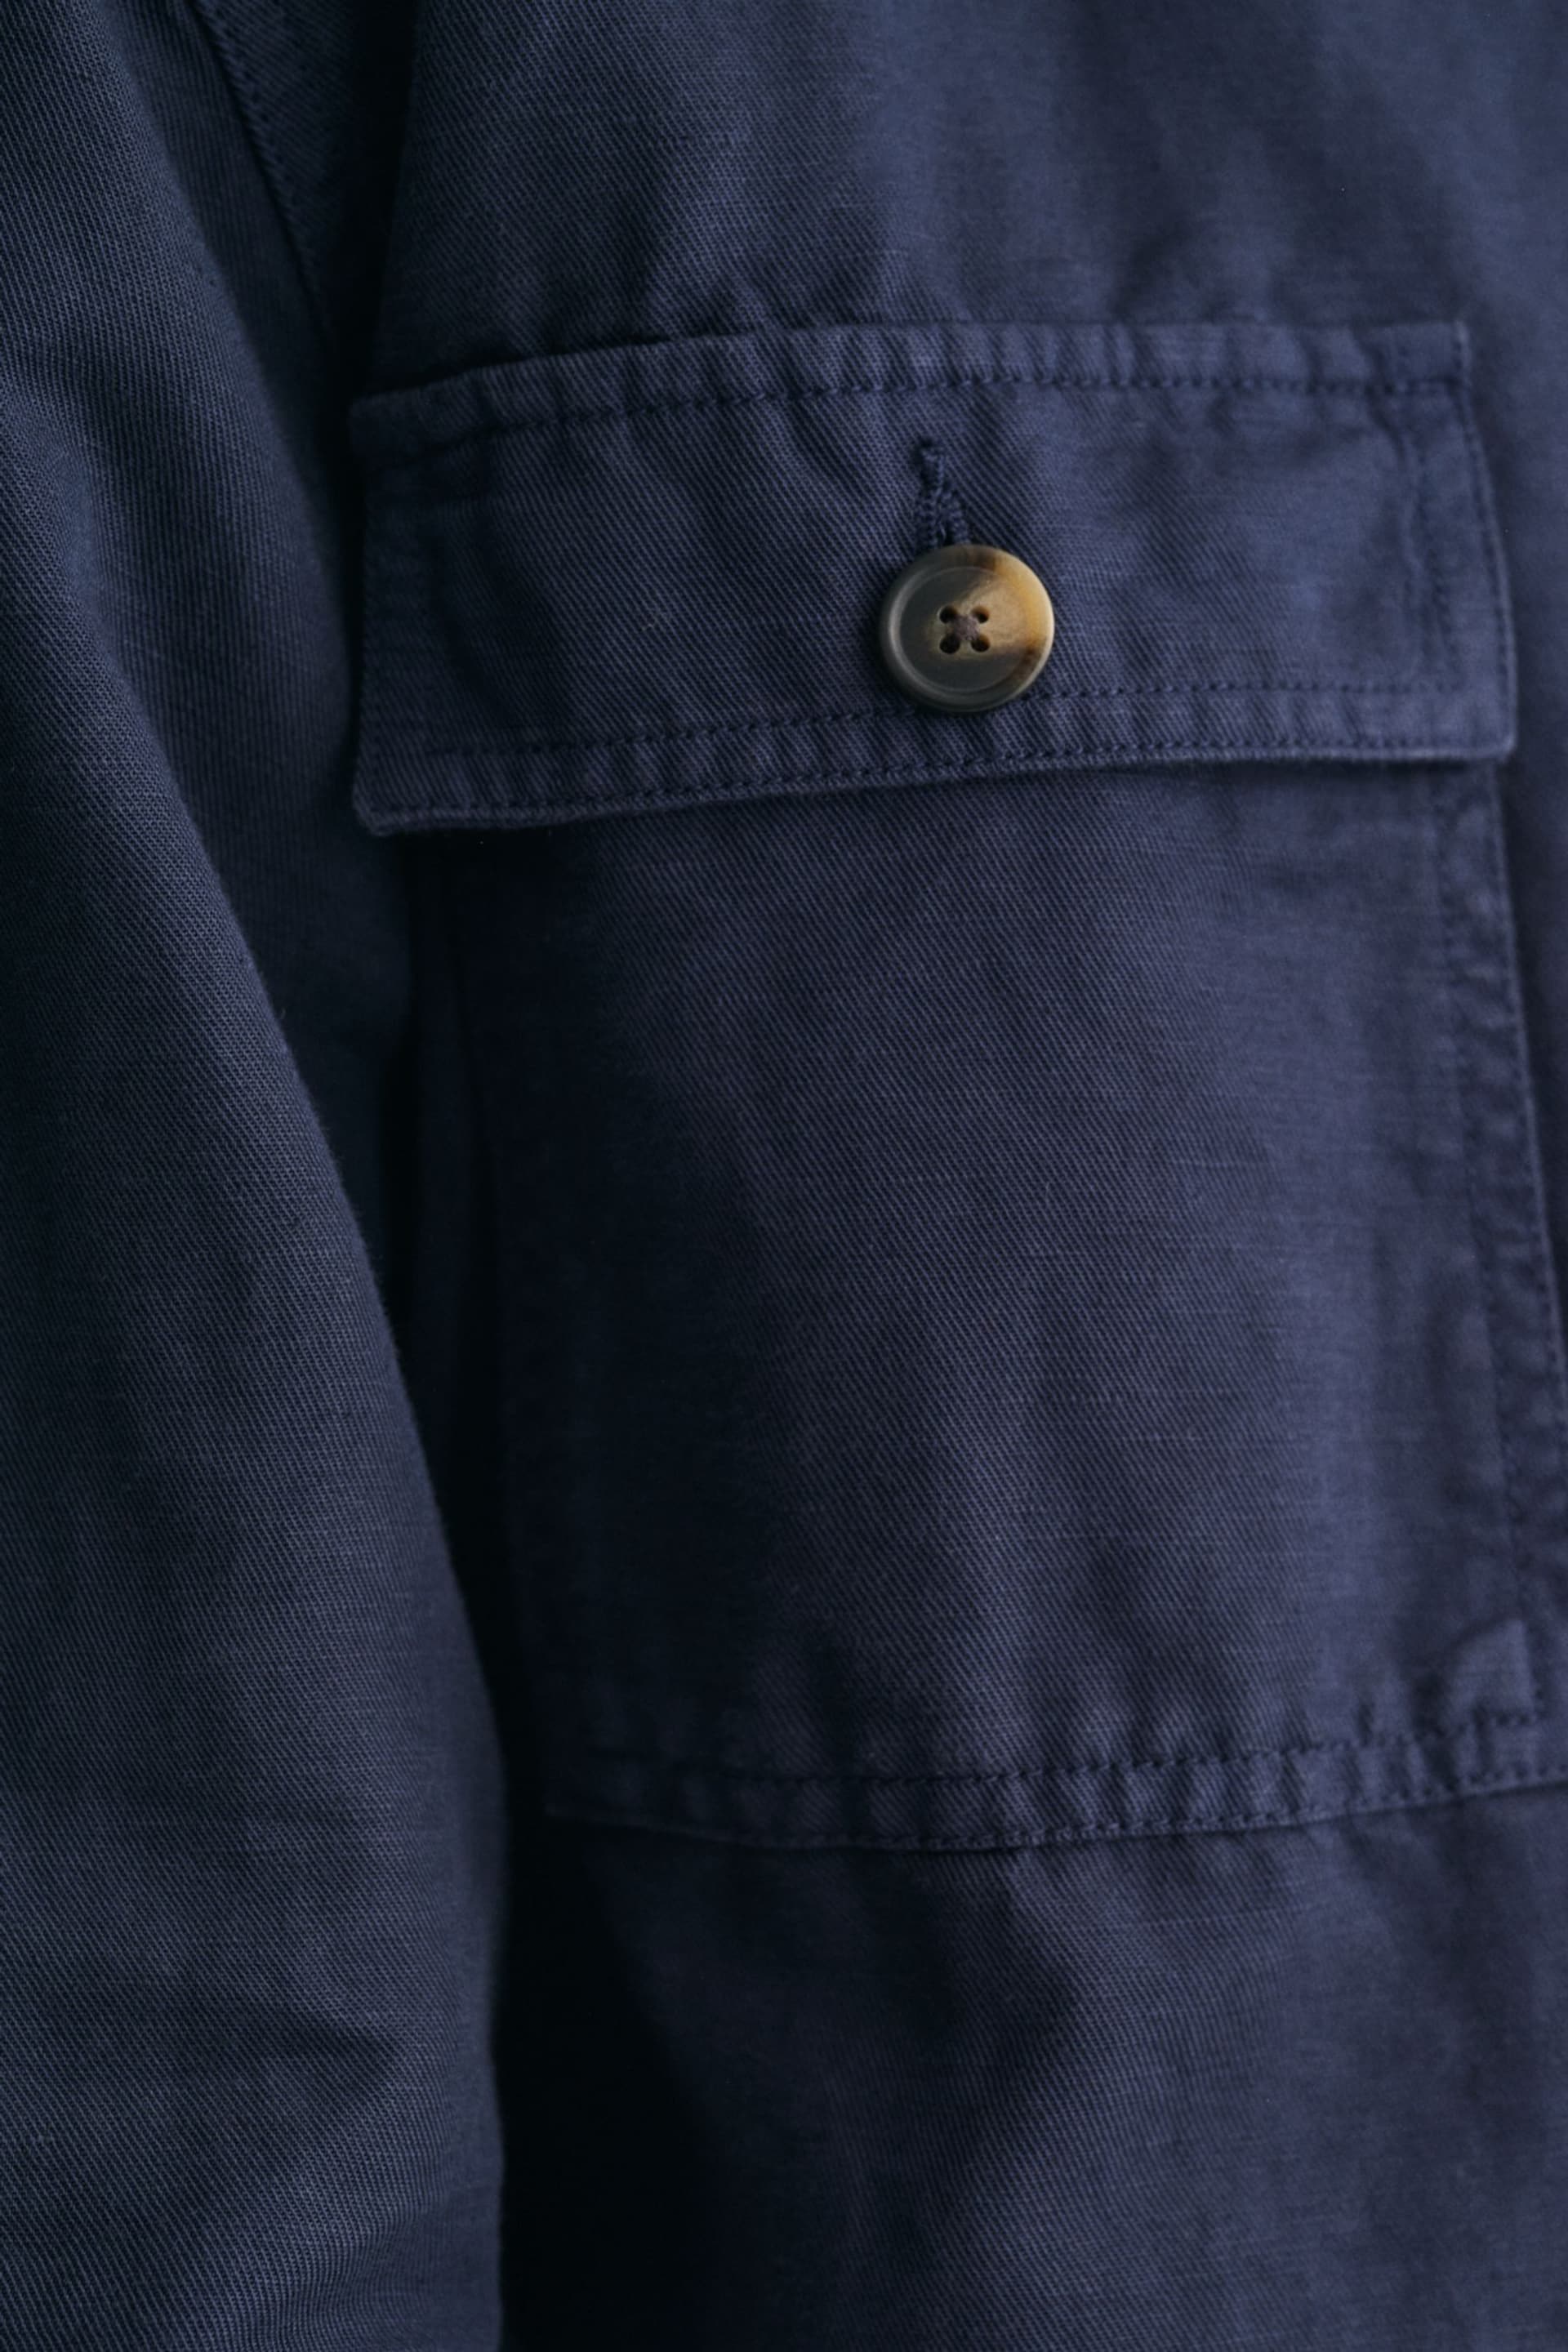 GANT Blue Relaxed Fit Cotton Linen Twill Overshirt - Image 6 of 7